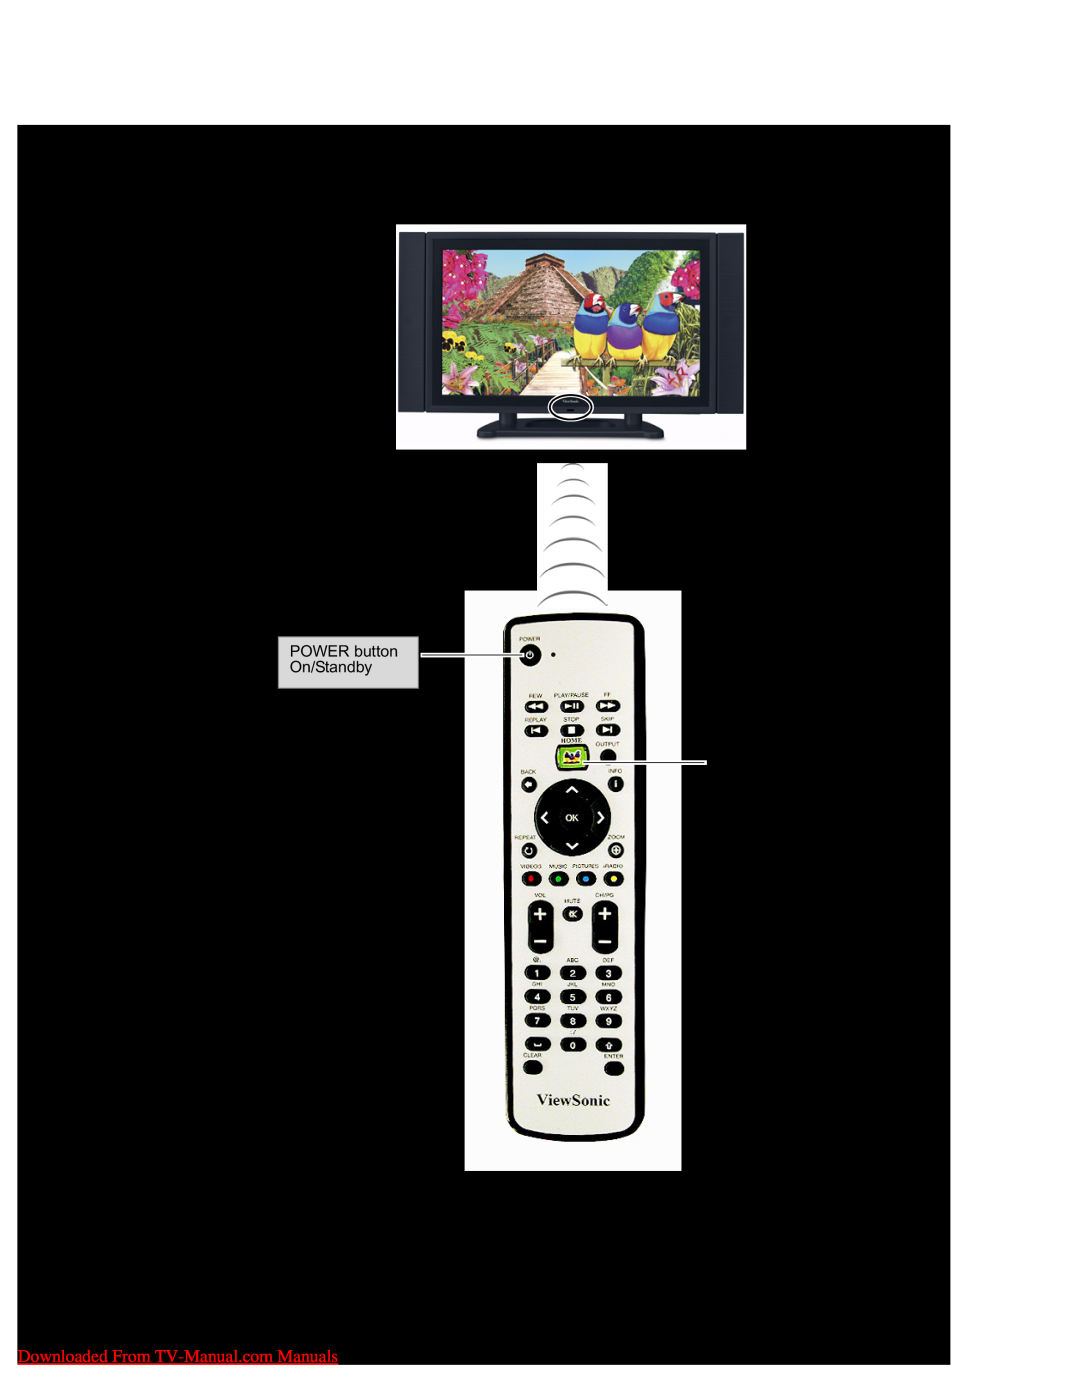 ViewSonic manual Remote Control, POWER button On/Standby Show IP, ViewSonic ND4210w 